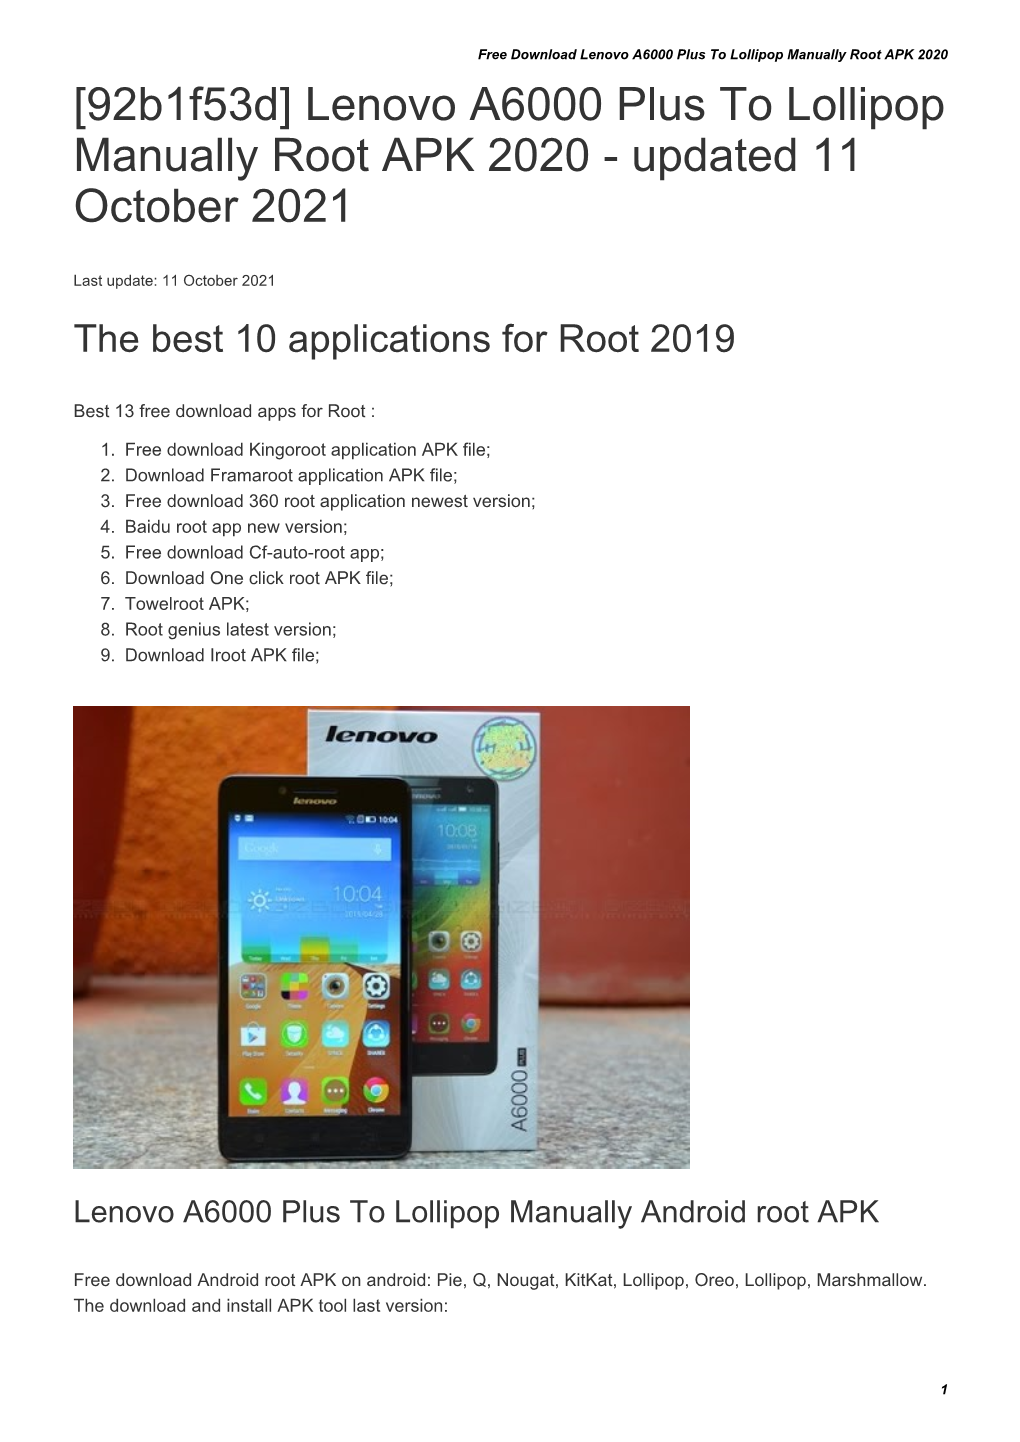 Lenovo A6000 Plus to Lollipop Manually Root APK 2020 [92B1f53d] Lenovo A6000 Plus to Lollipop Manually Root APK 2020 - Updated 11 October 2021